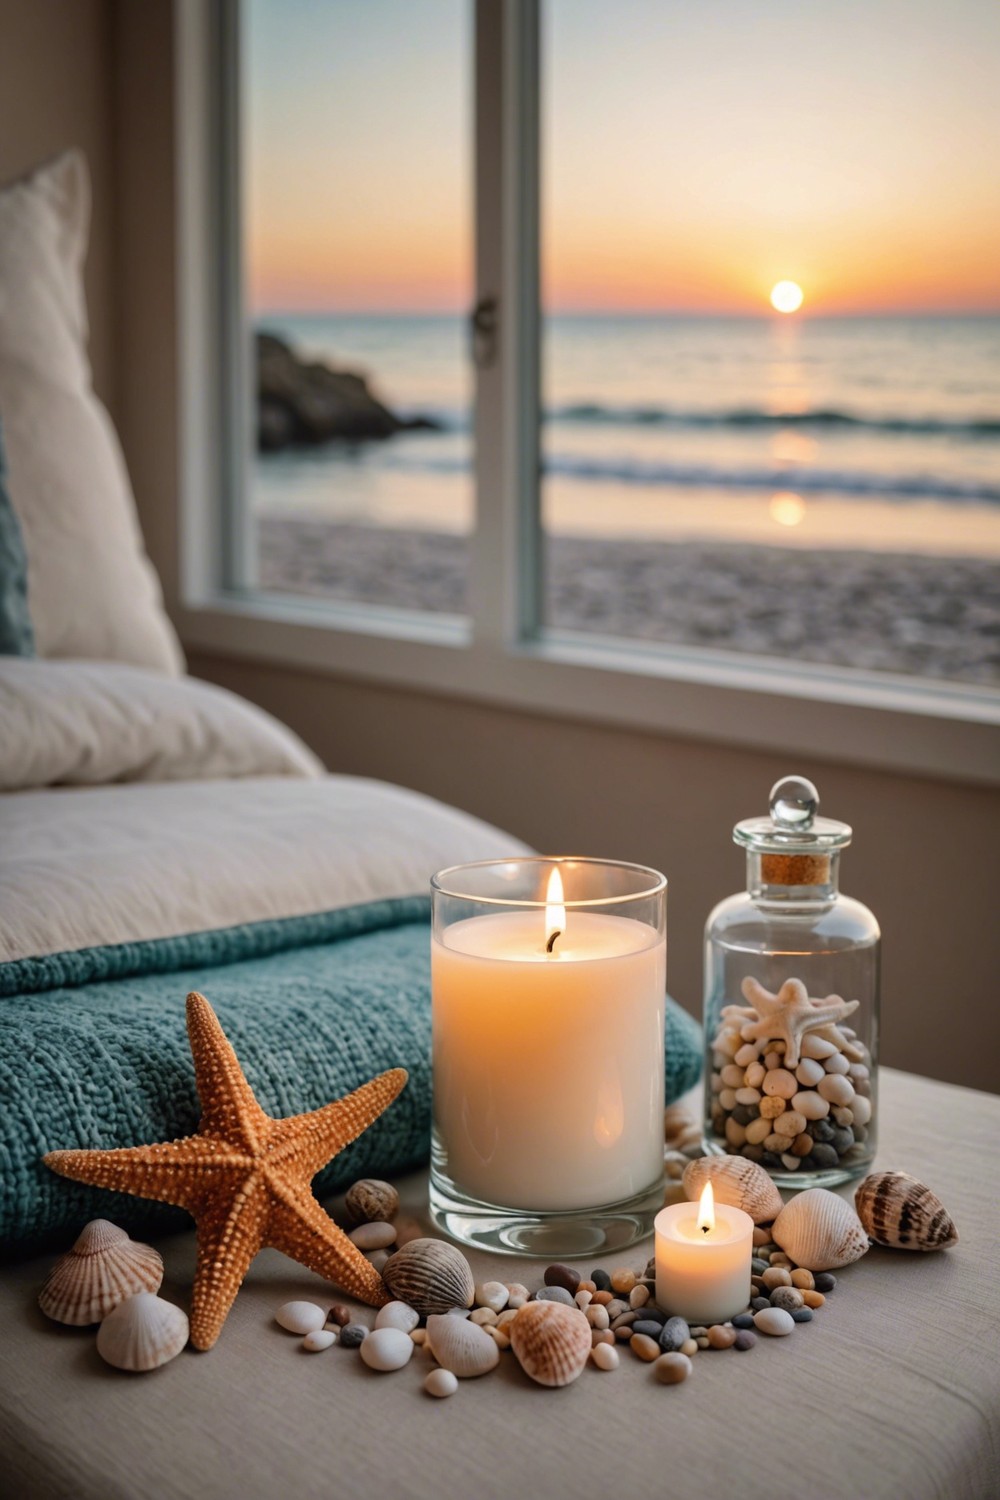 Coastal Scents to Create a Calming Atmosphere